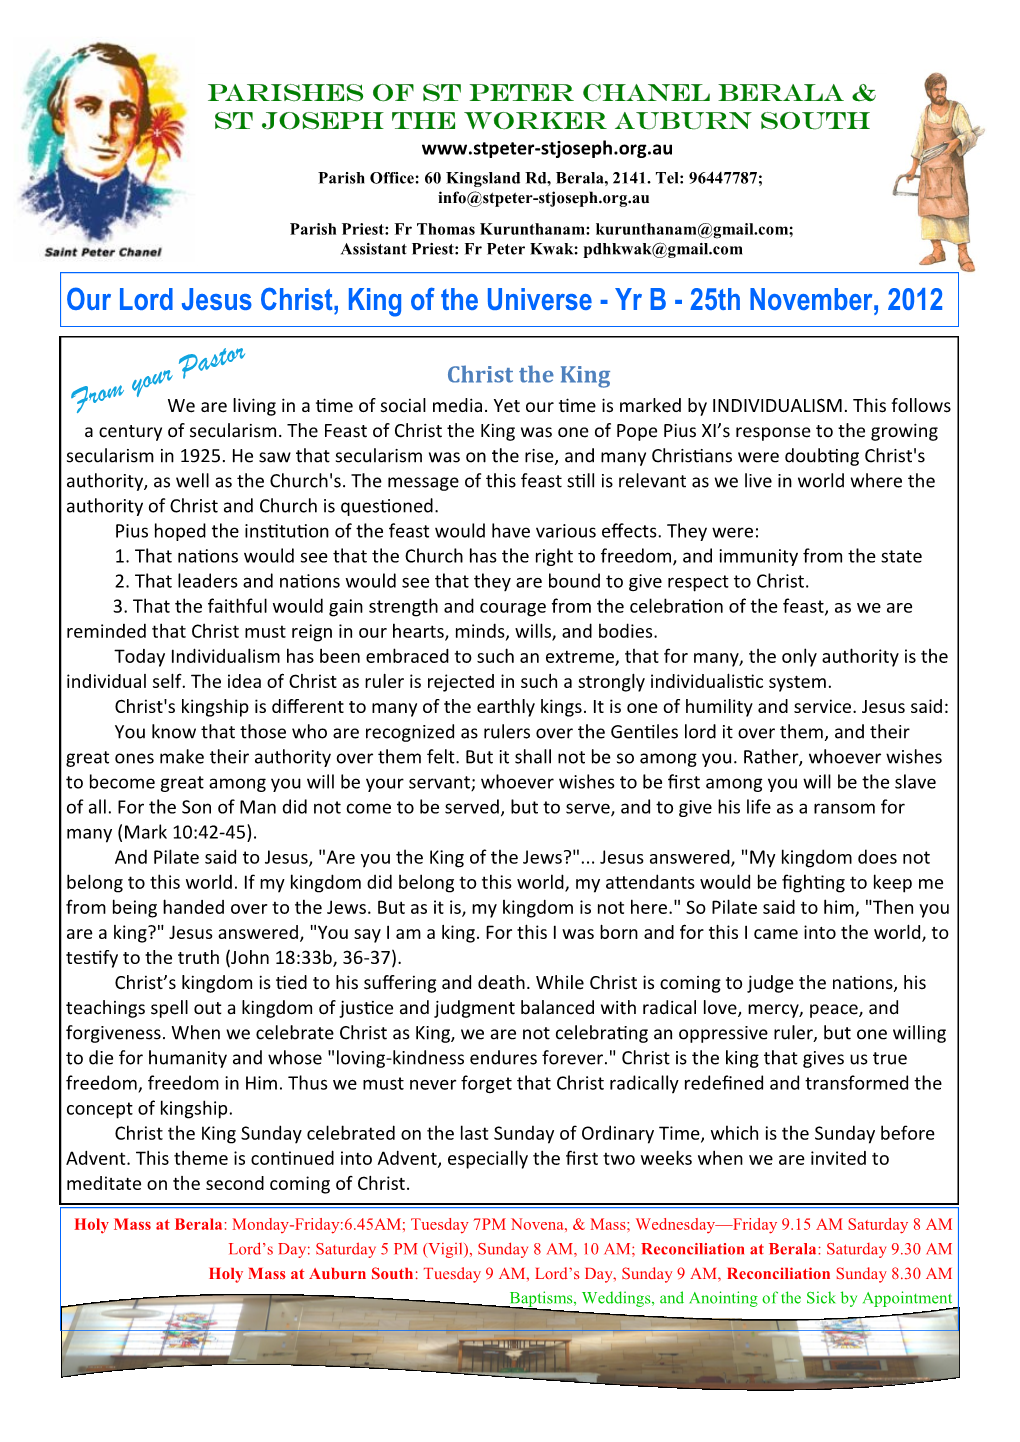 Our Lord Jesus Christ, King of the Universe - Yr B - 25Th November, 2012